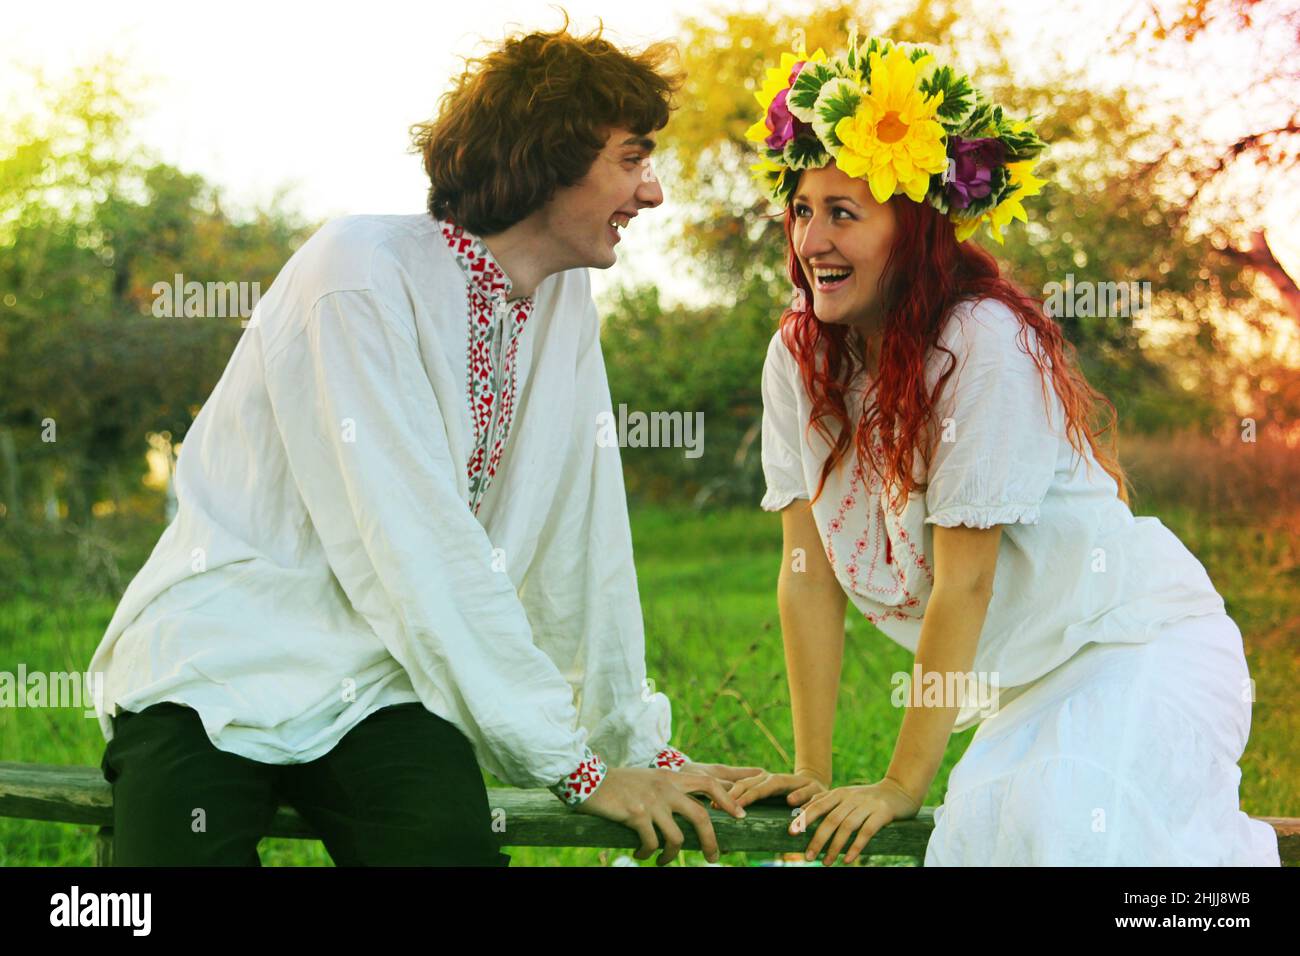 couple in love in national costumes, europe, traditional costumes for a wedding in eastern europe, a wreath on a girl's head, wedding Stock Photo